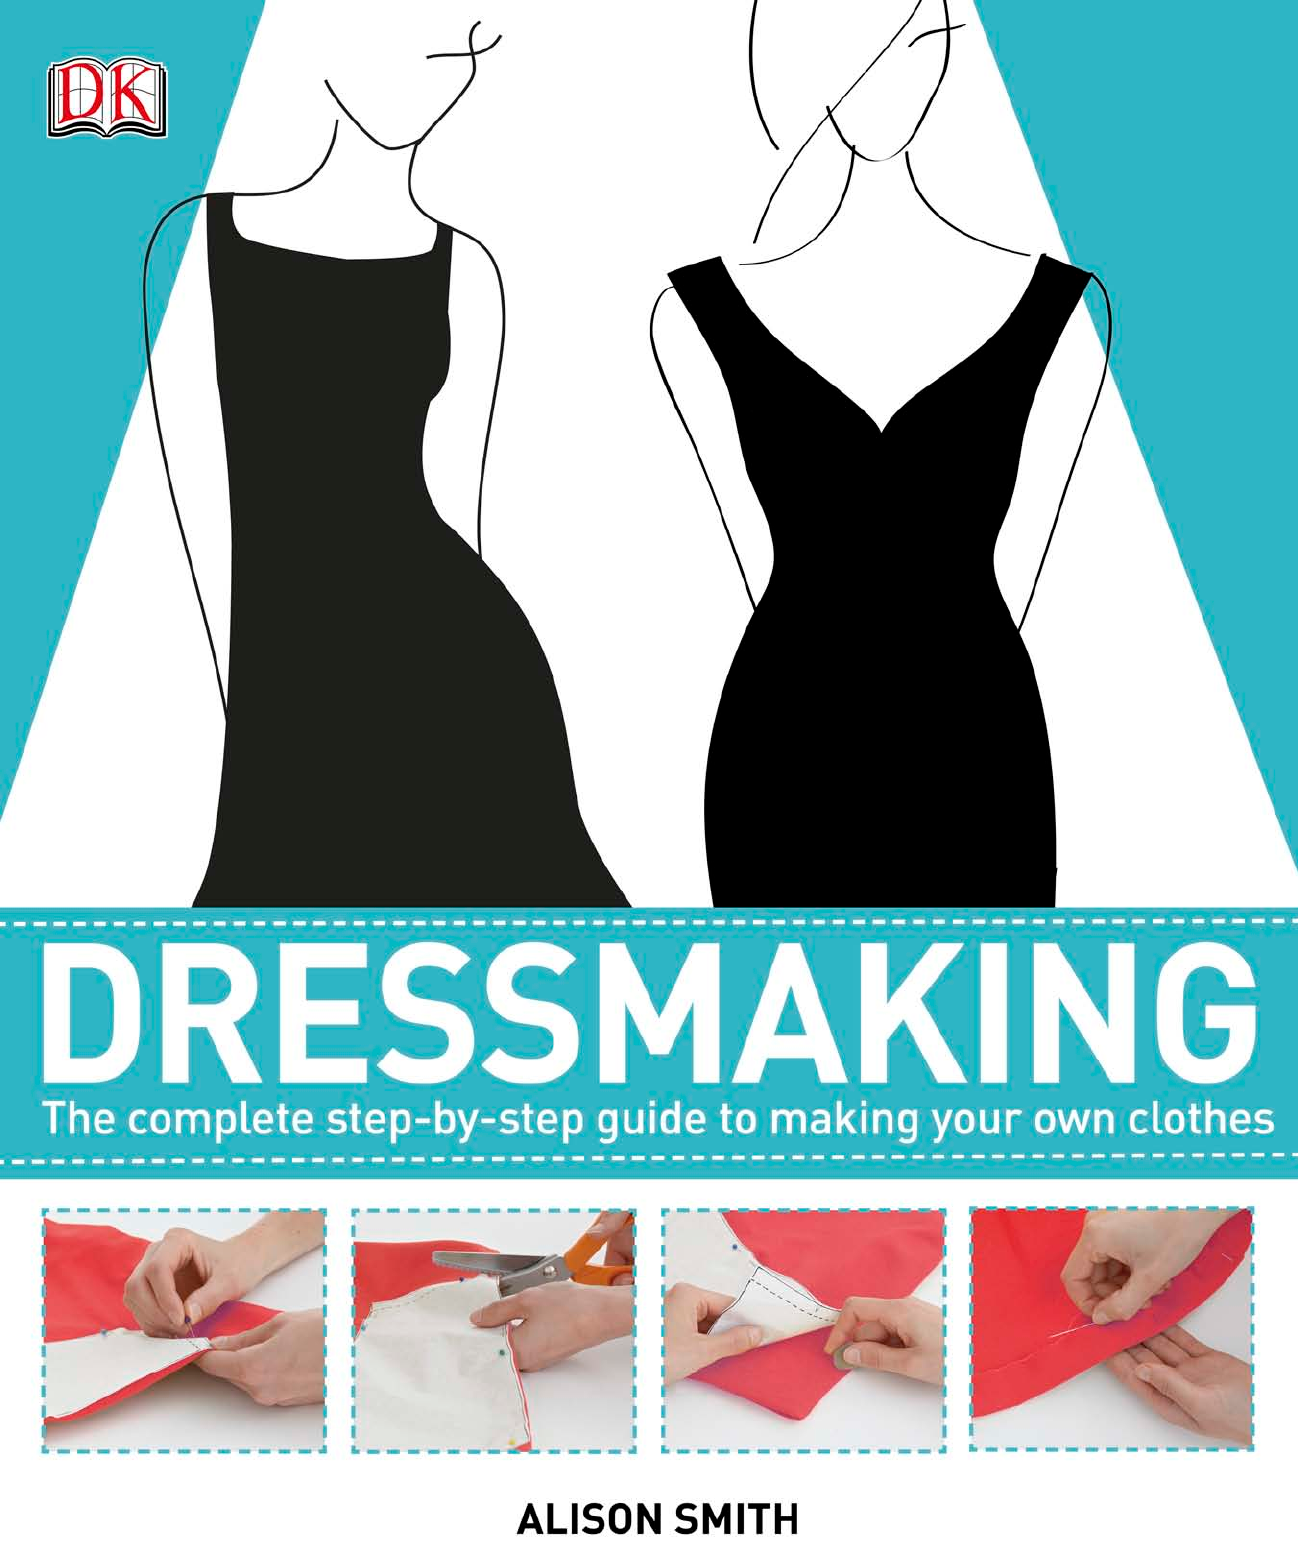 Dressmaking The Complete Step-by-Step Guide to Making your Own